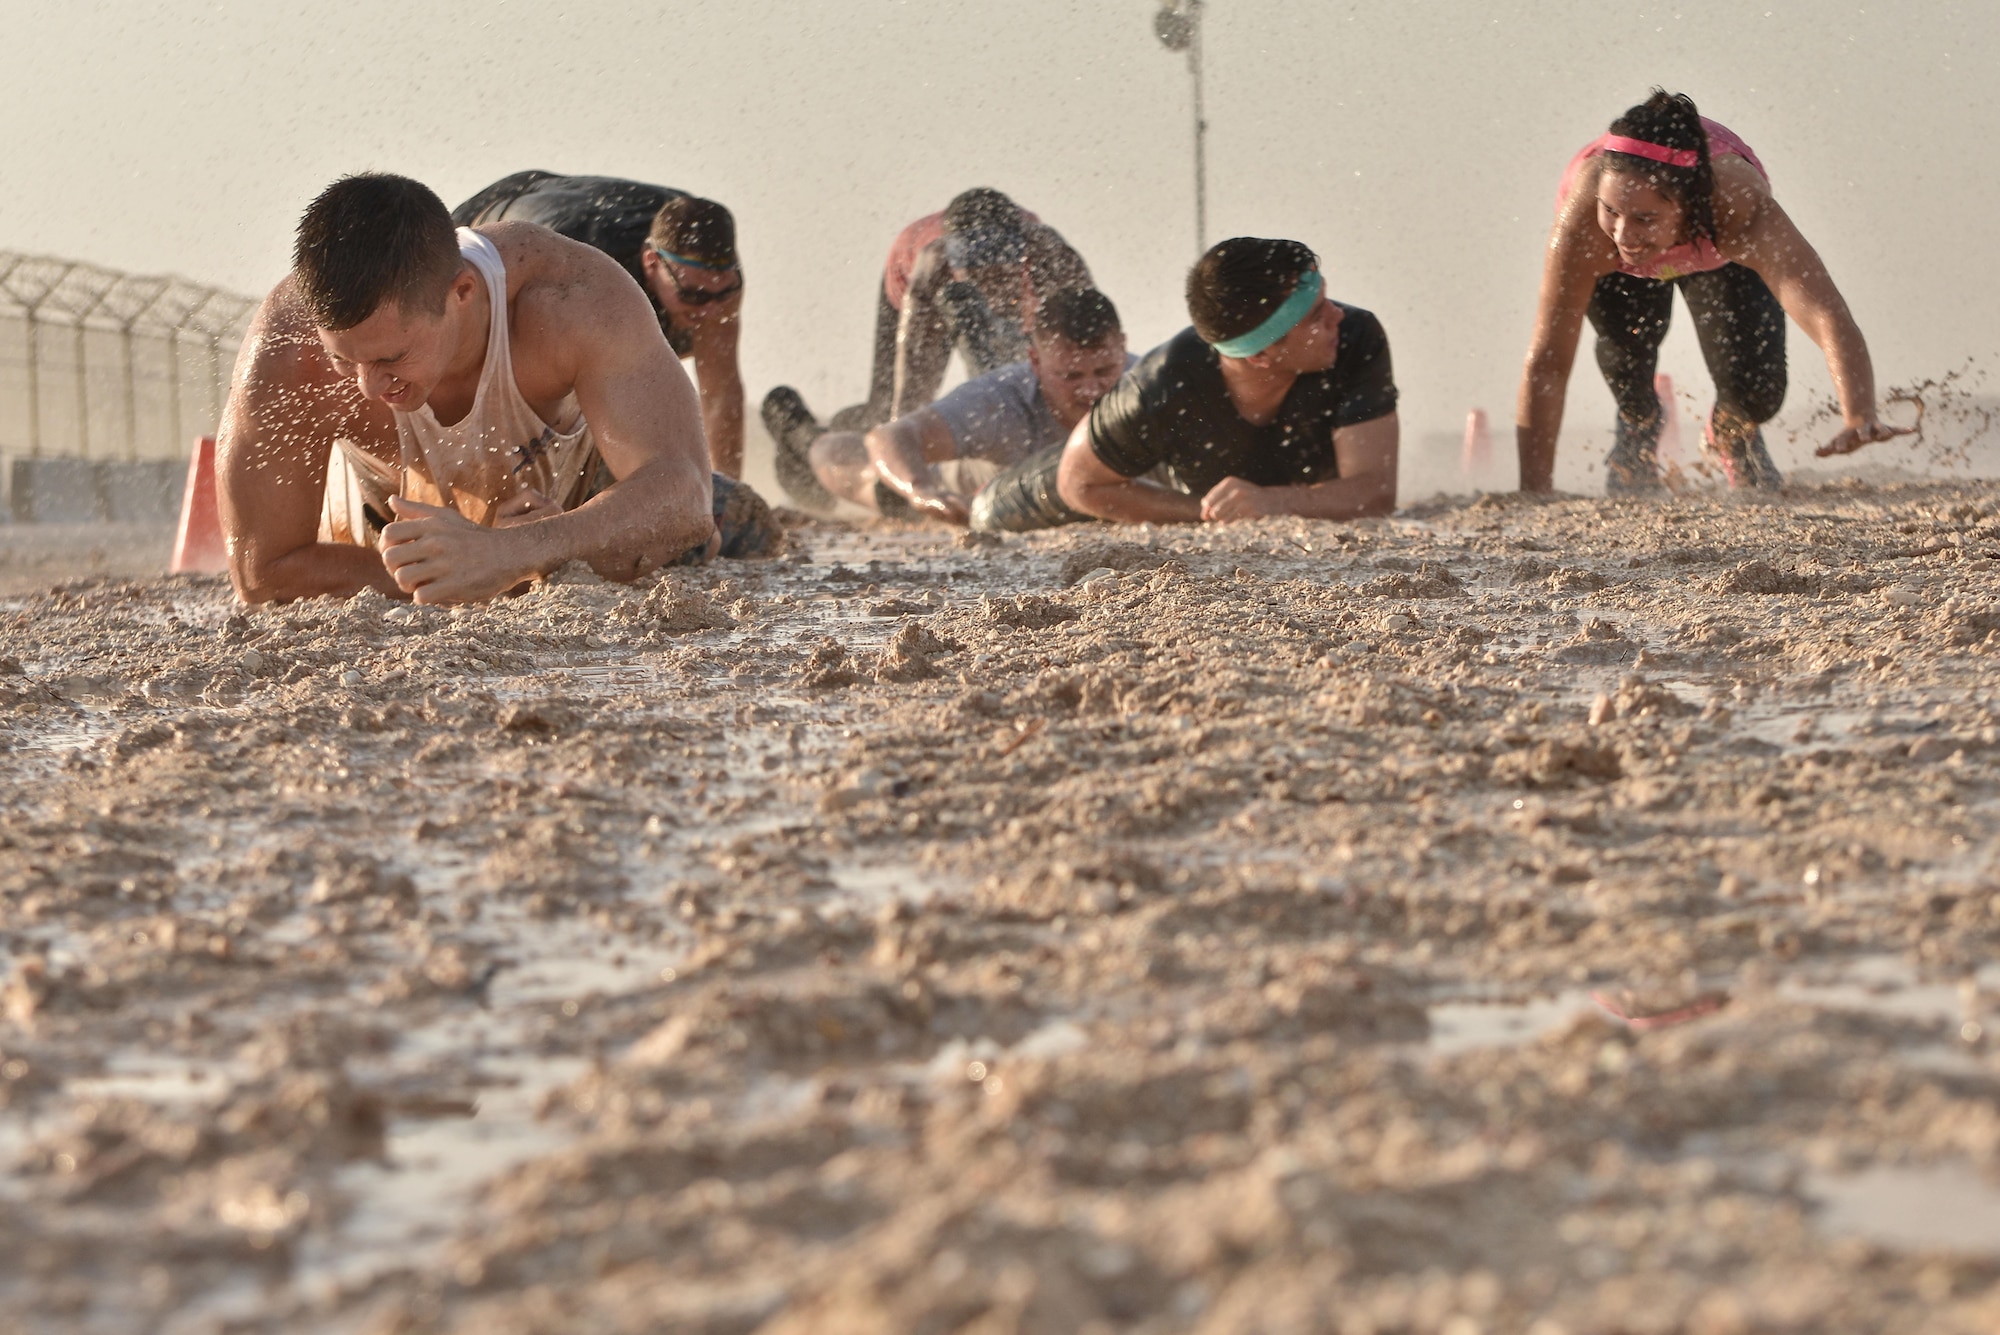 Diversity Day Mud Run participants low crawl through a mud pit to continue the race September 20, 2015 at Al Udeid Air Base, Qatar. The mud run challenged 106 runners with a two mile course that contained several obstacles from low crawling, T-wall climbing, barrier hurdles, and a Ôdeep freezeÕ cold mud pool. The event was held to help spread the word of Diversity Day, an initiative started by the Department of Defense for diversity events held throughout the year. (U.S. Air Force photo/ Staff Sgt. Alexandre Montes)